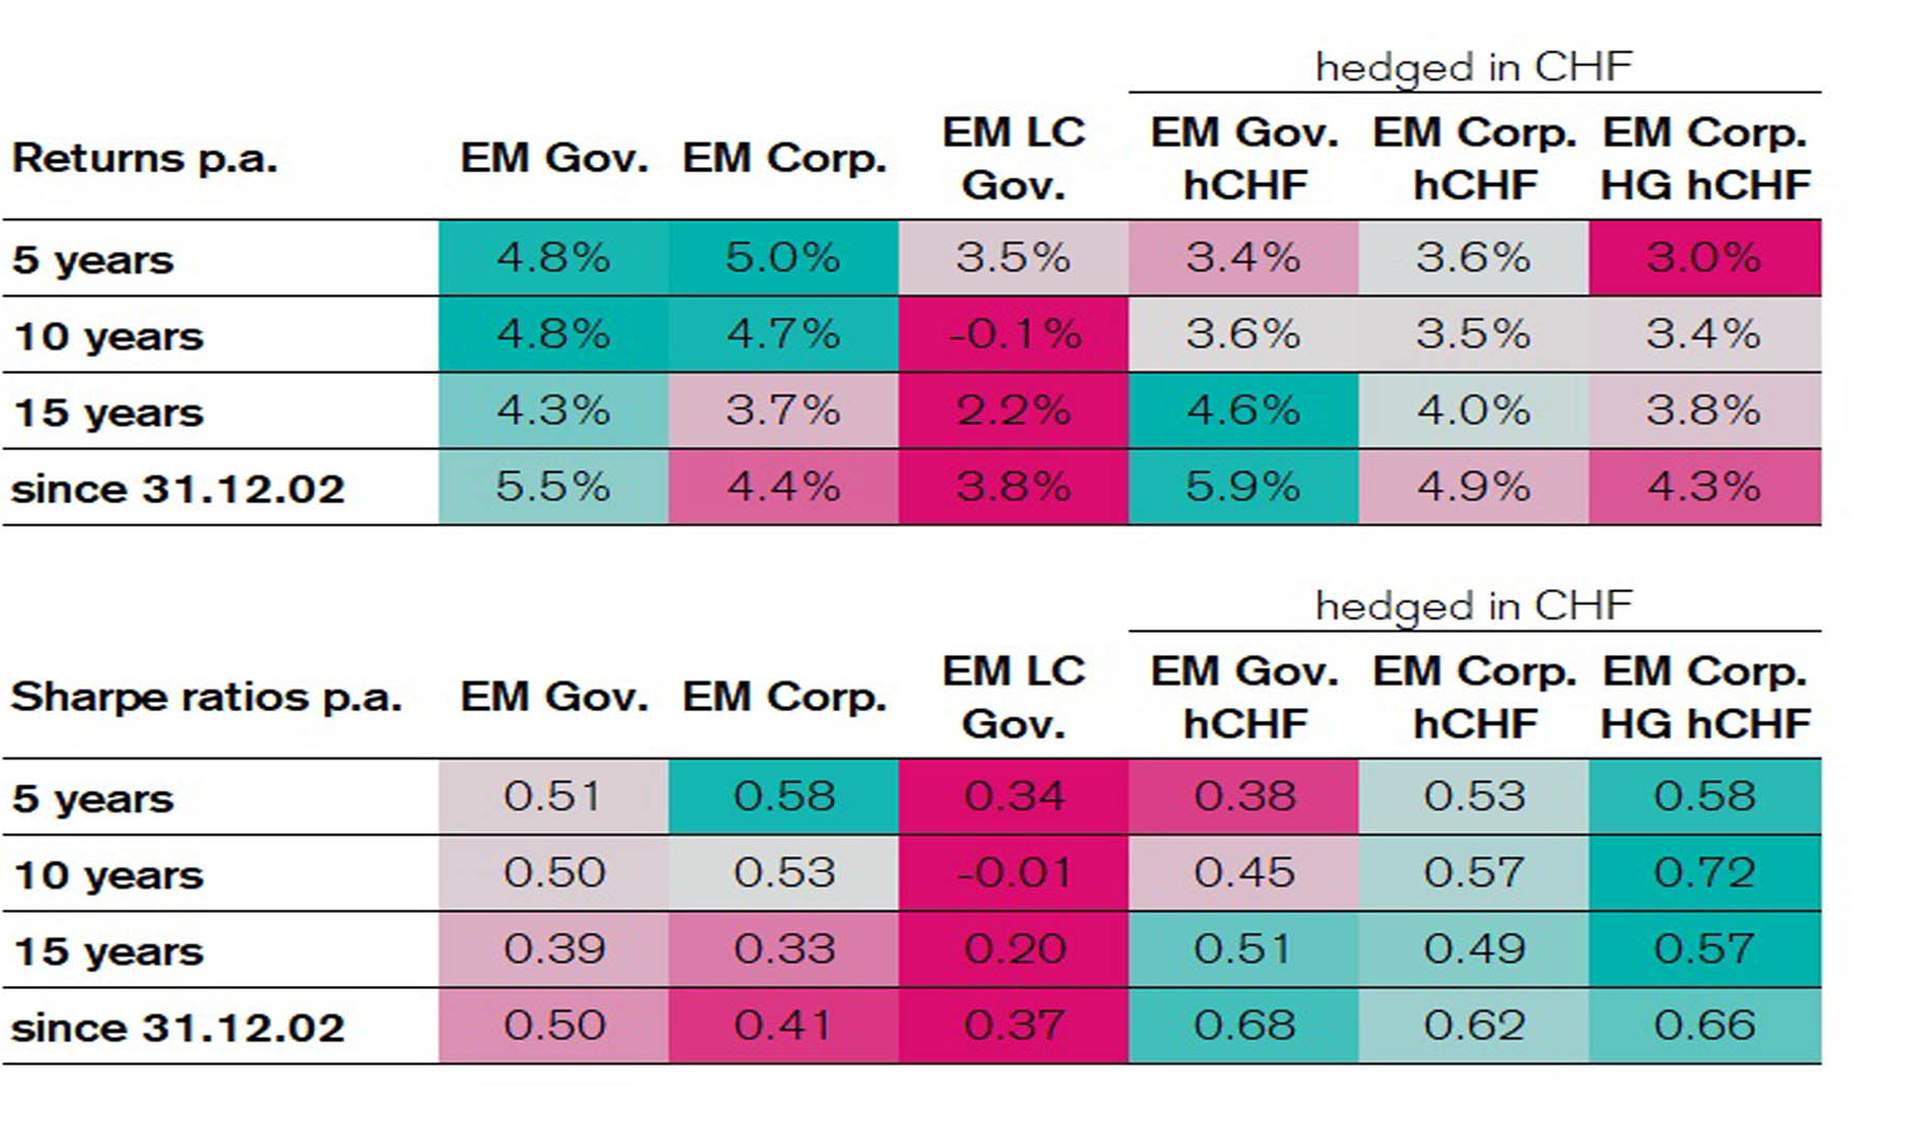 Since the end of 2002 and over different periods, both the returns and sharpe ratios between bonds in local currency, hard currency as well as hedged in CHF vary. 